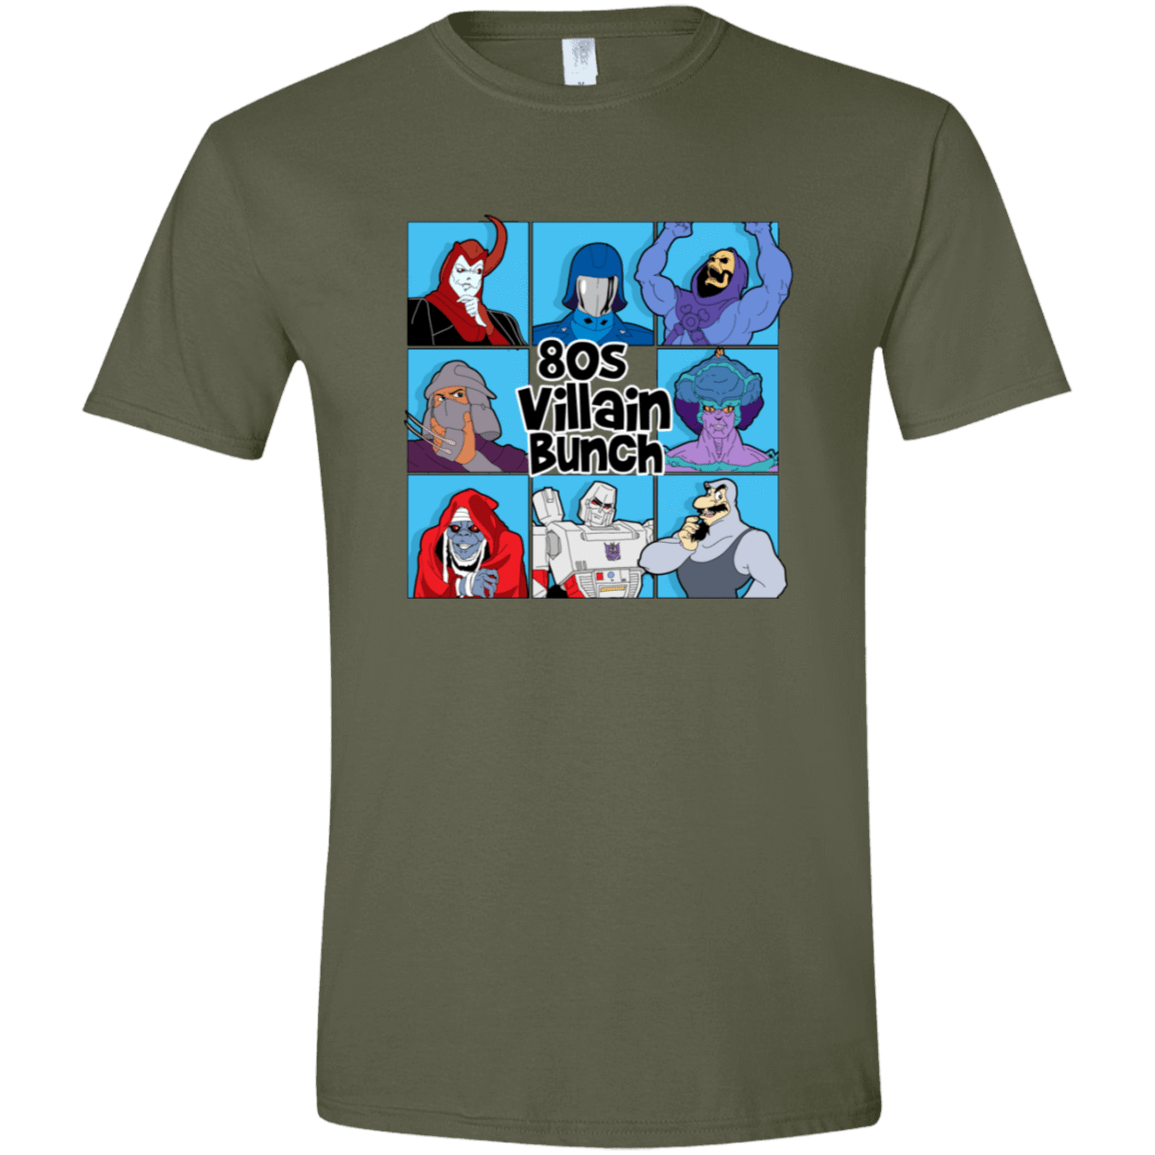 T-Shirts Military Green / S 80s Villians Bunch Men's Semi-Fitted Softstyle